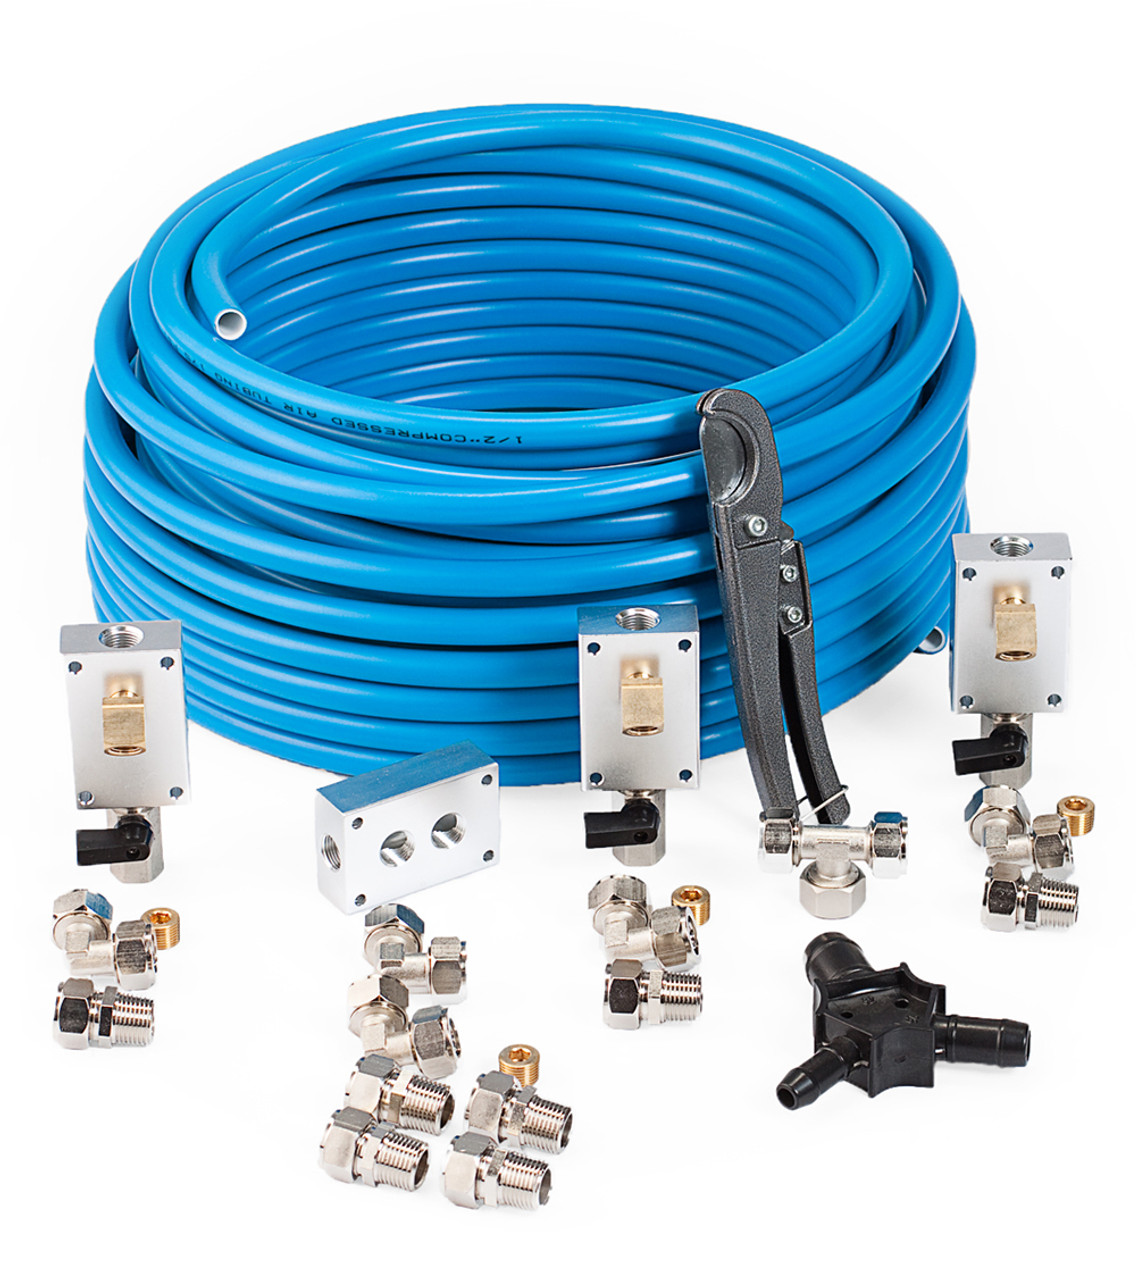 Maxline Piping System M3800 100 ft Master Kit 1/2" by Rapid Air